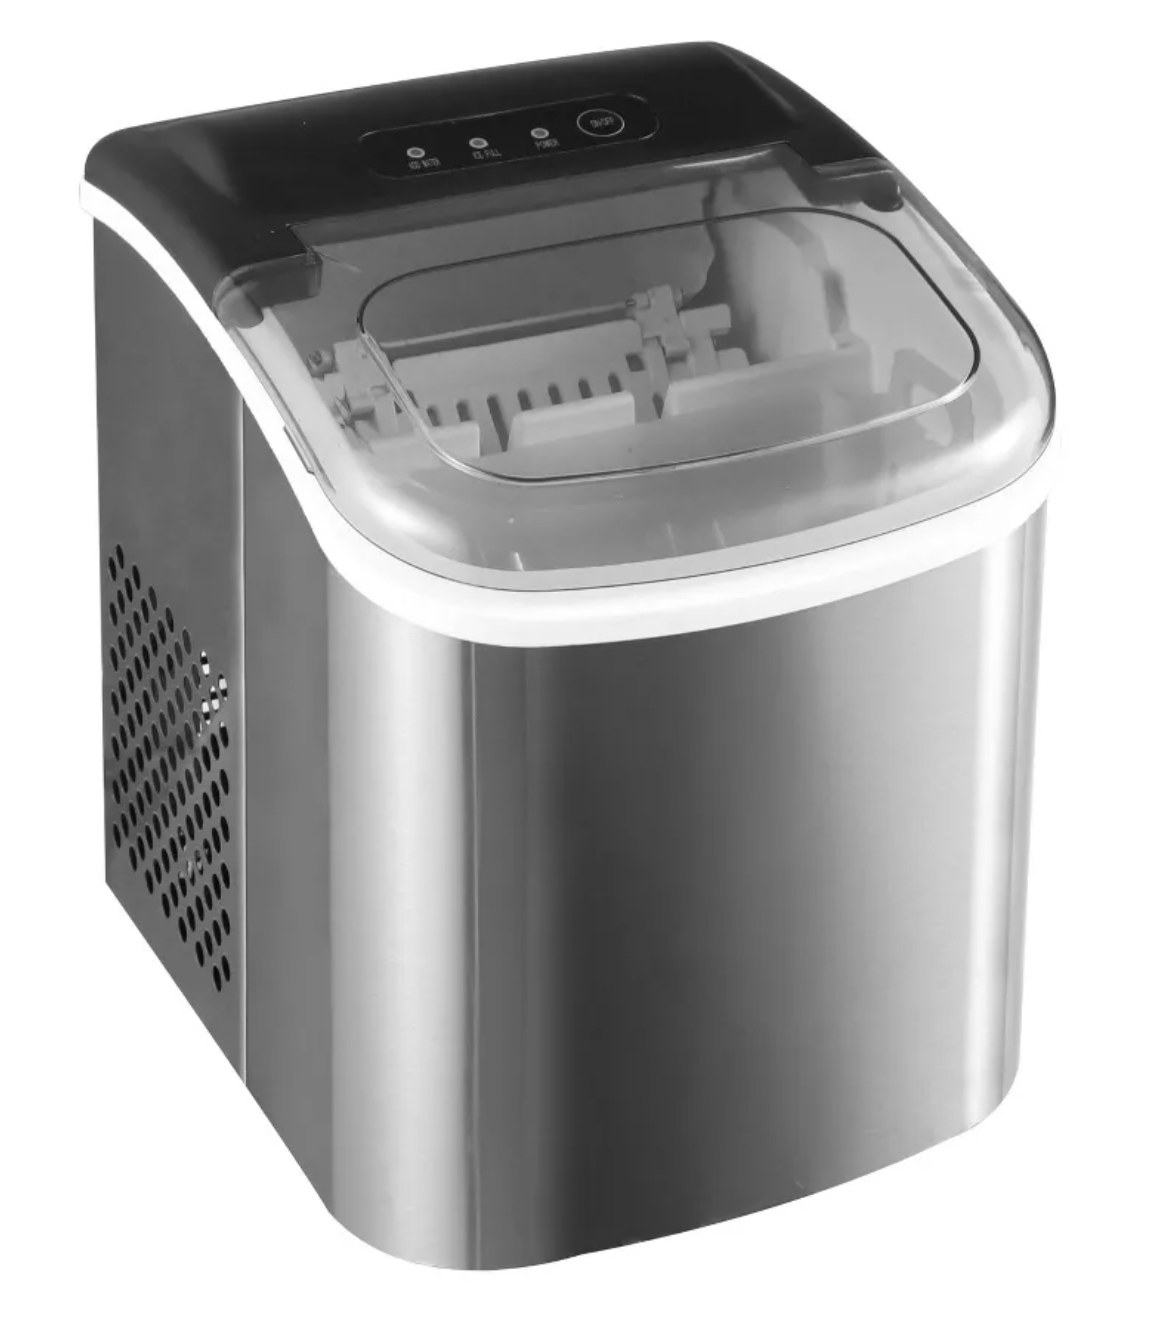 the stainless steel ice maker